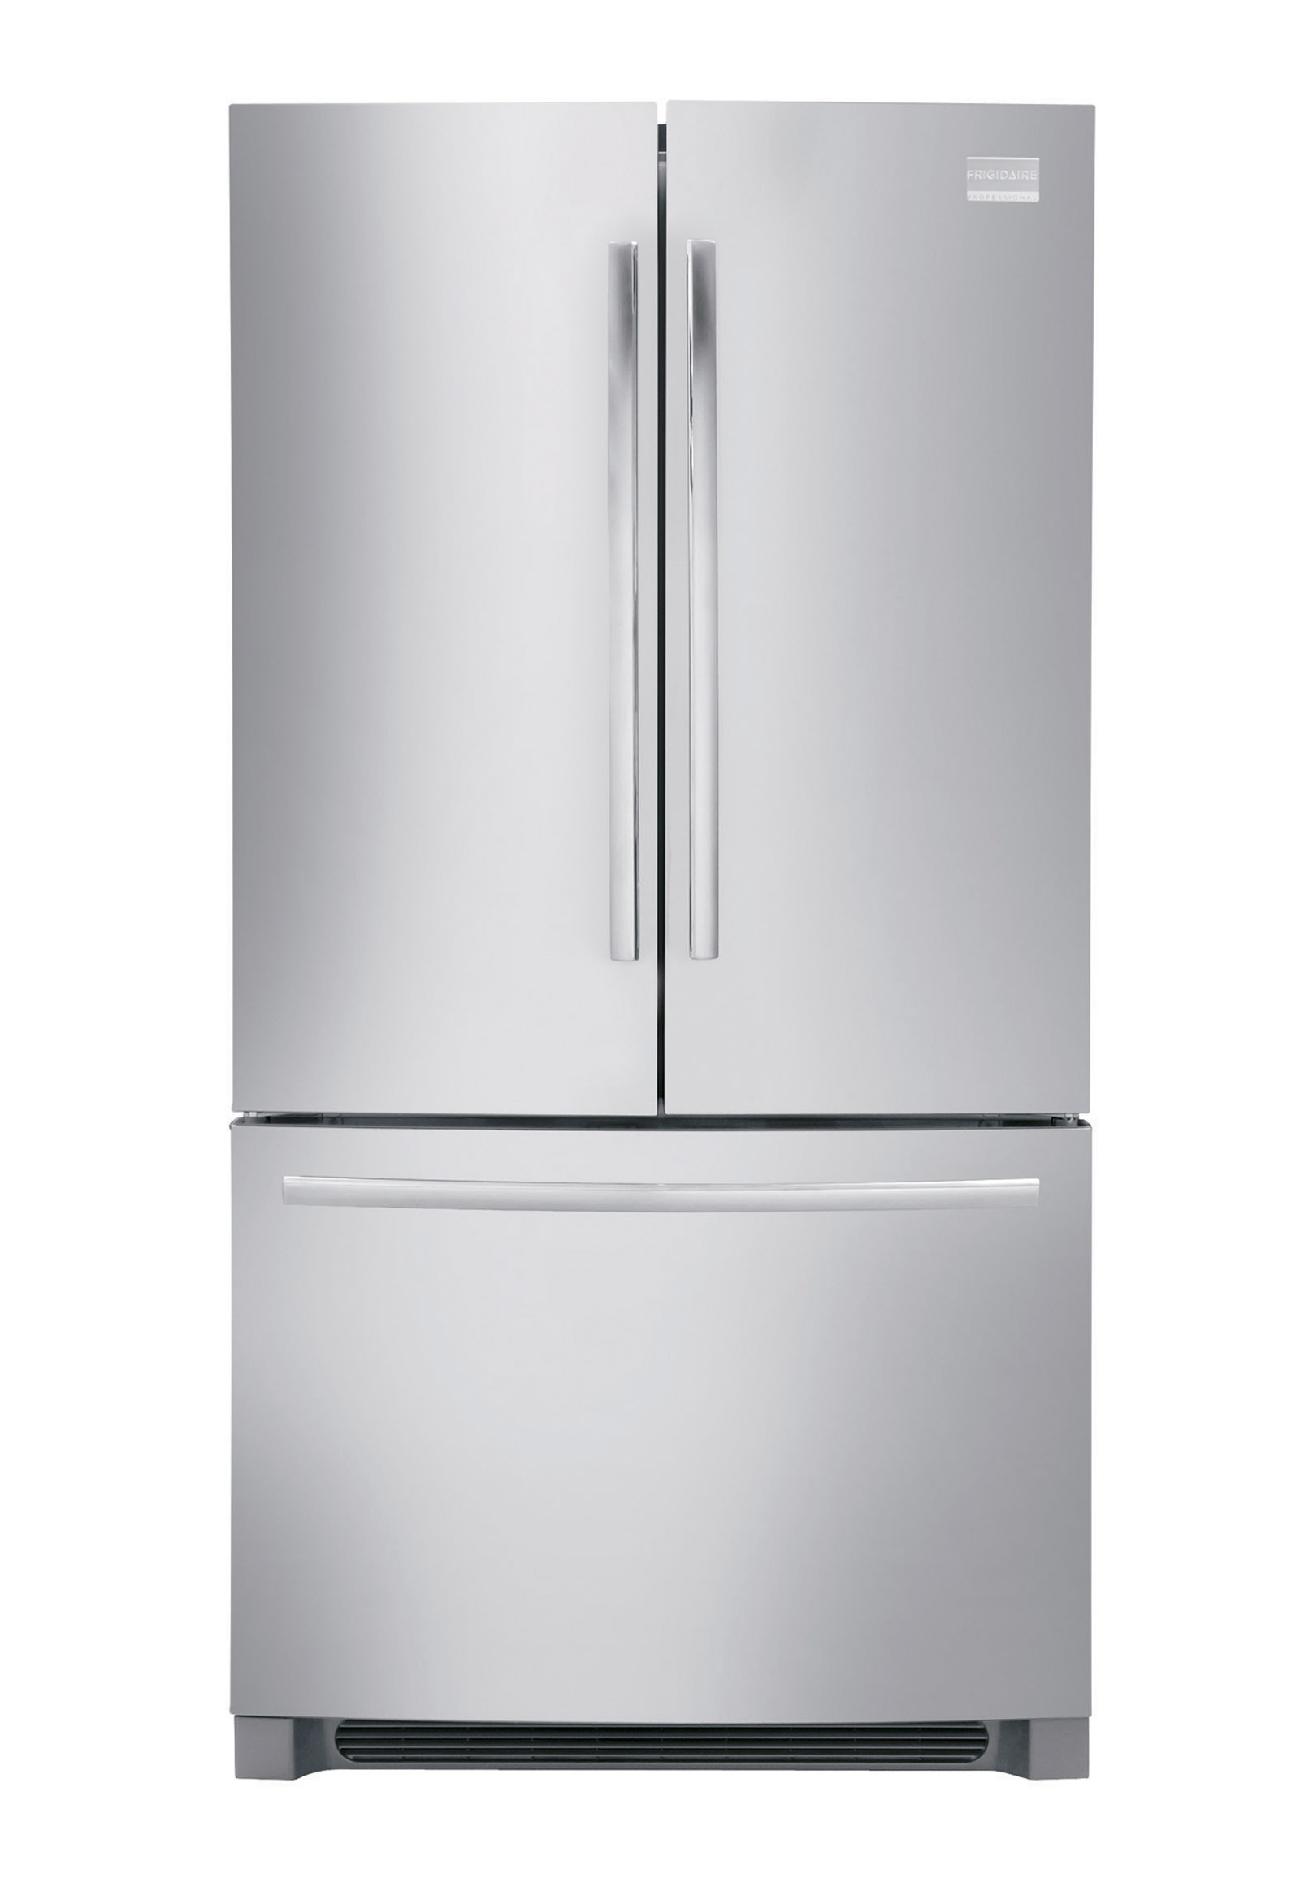 Frigidaire Professional 22.6 cu. ft. Counter-Depth French Door Refrigerator - Stainless Steel